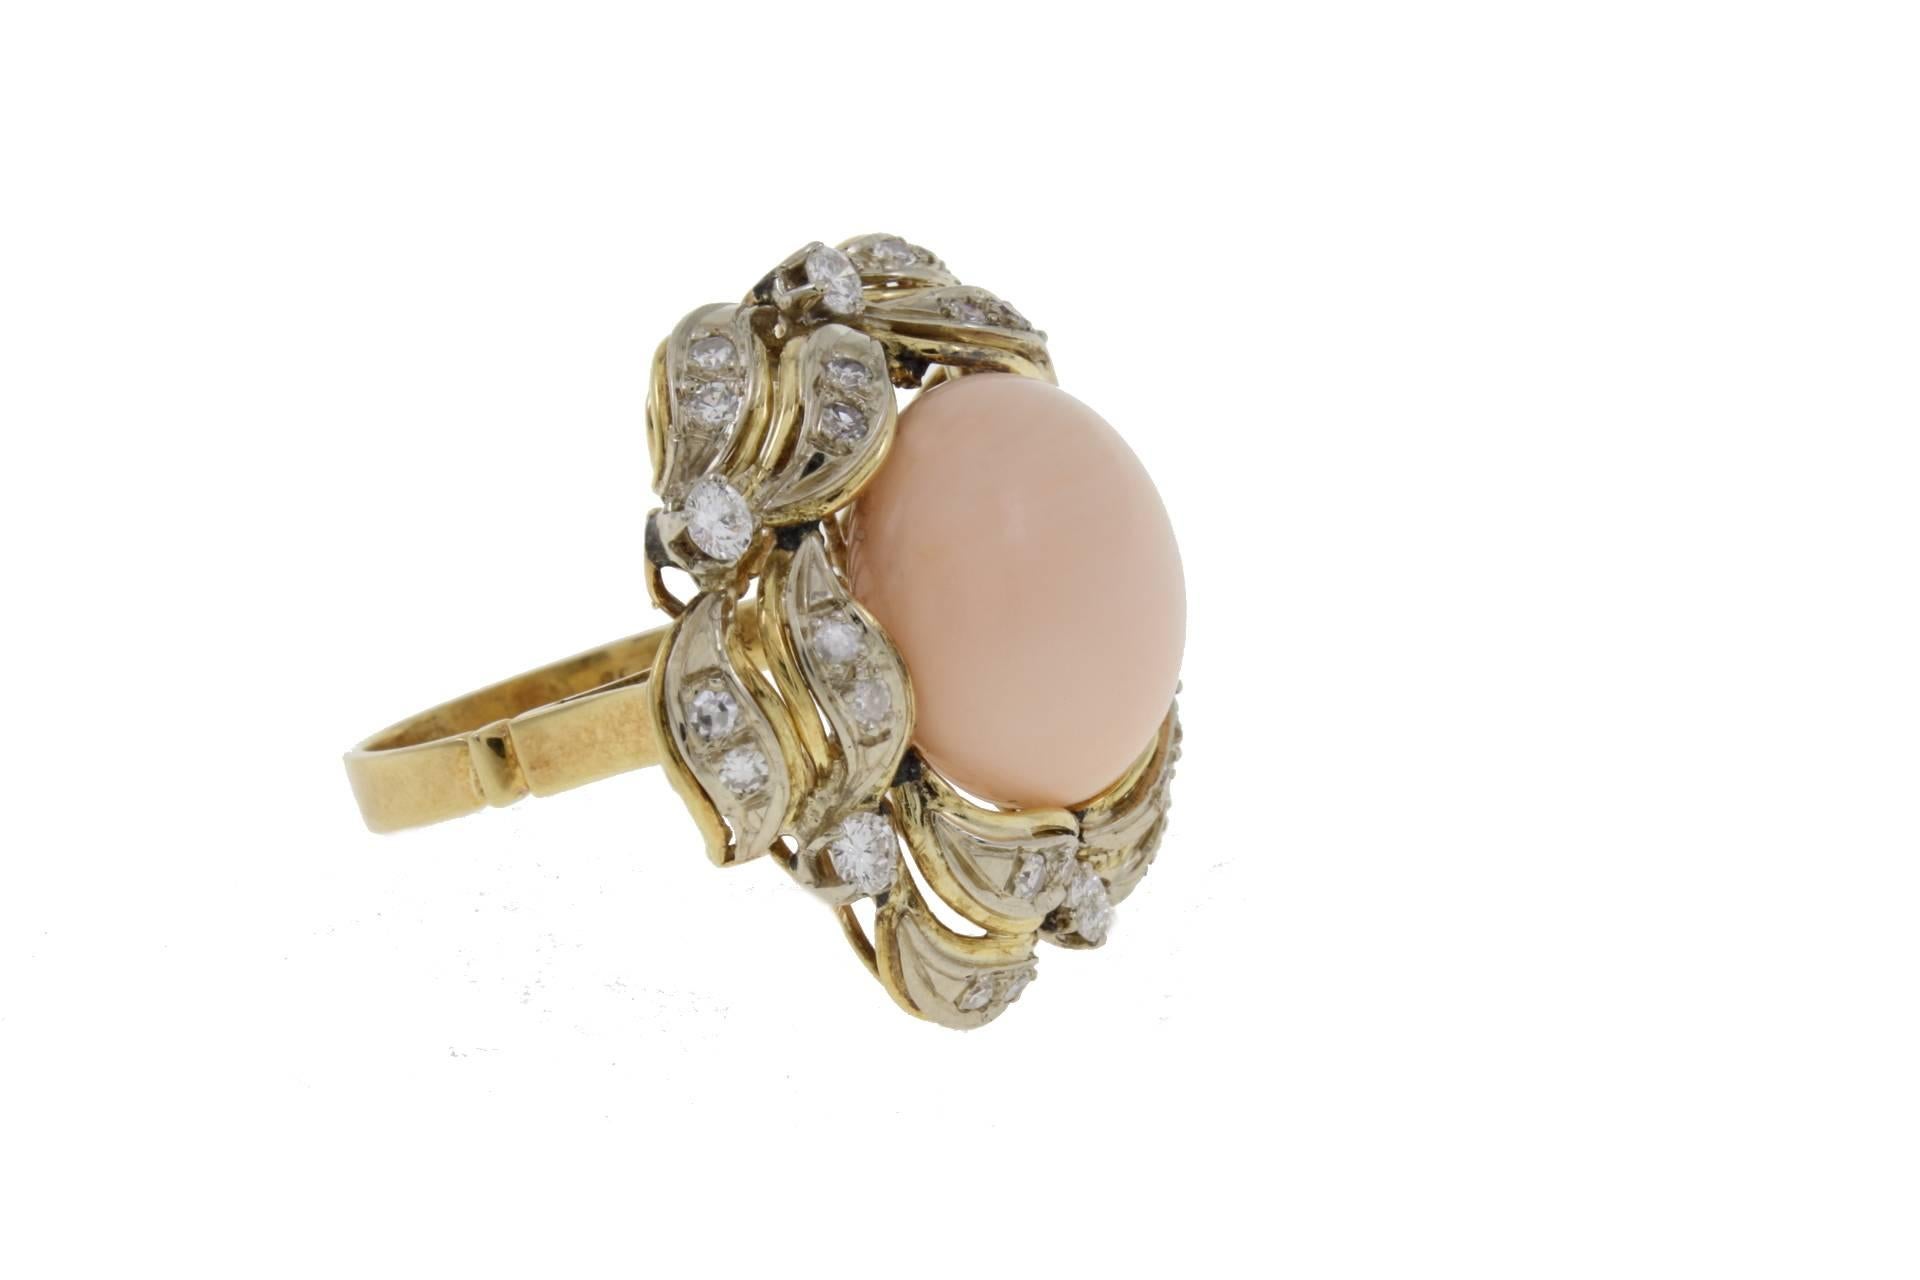 SHIPPING POLICY: 
No additional costs will be added to this order.
Shipping costs will be totally covered by the seller (customs duties included). 


Elegant ring in 18 kt white and yellow gold composed of a central pink coral dome surrounded by